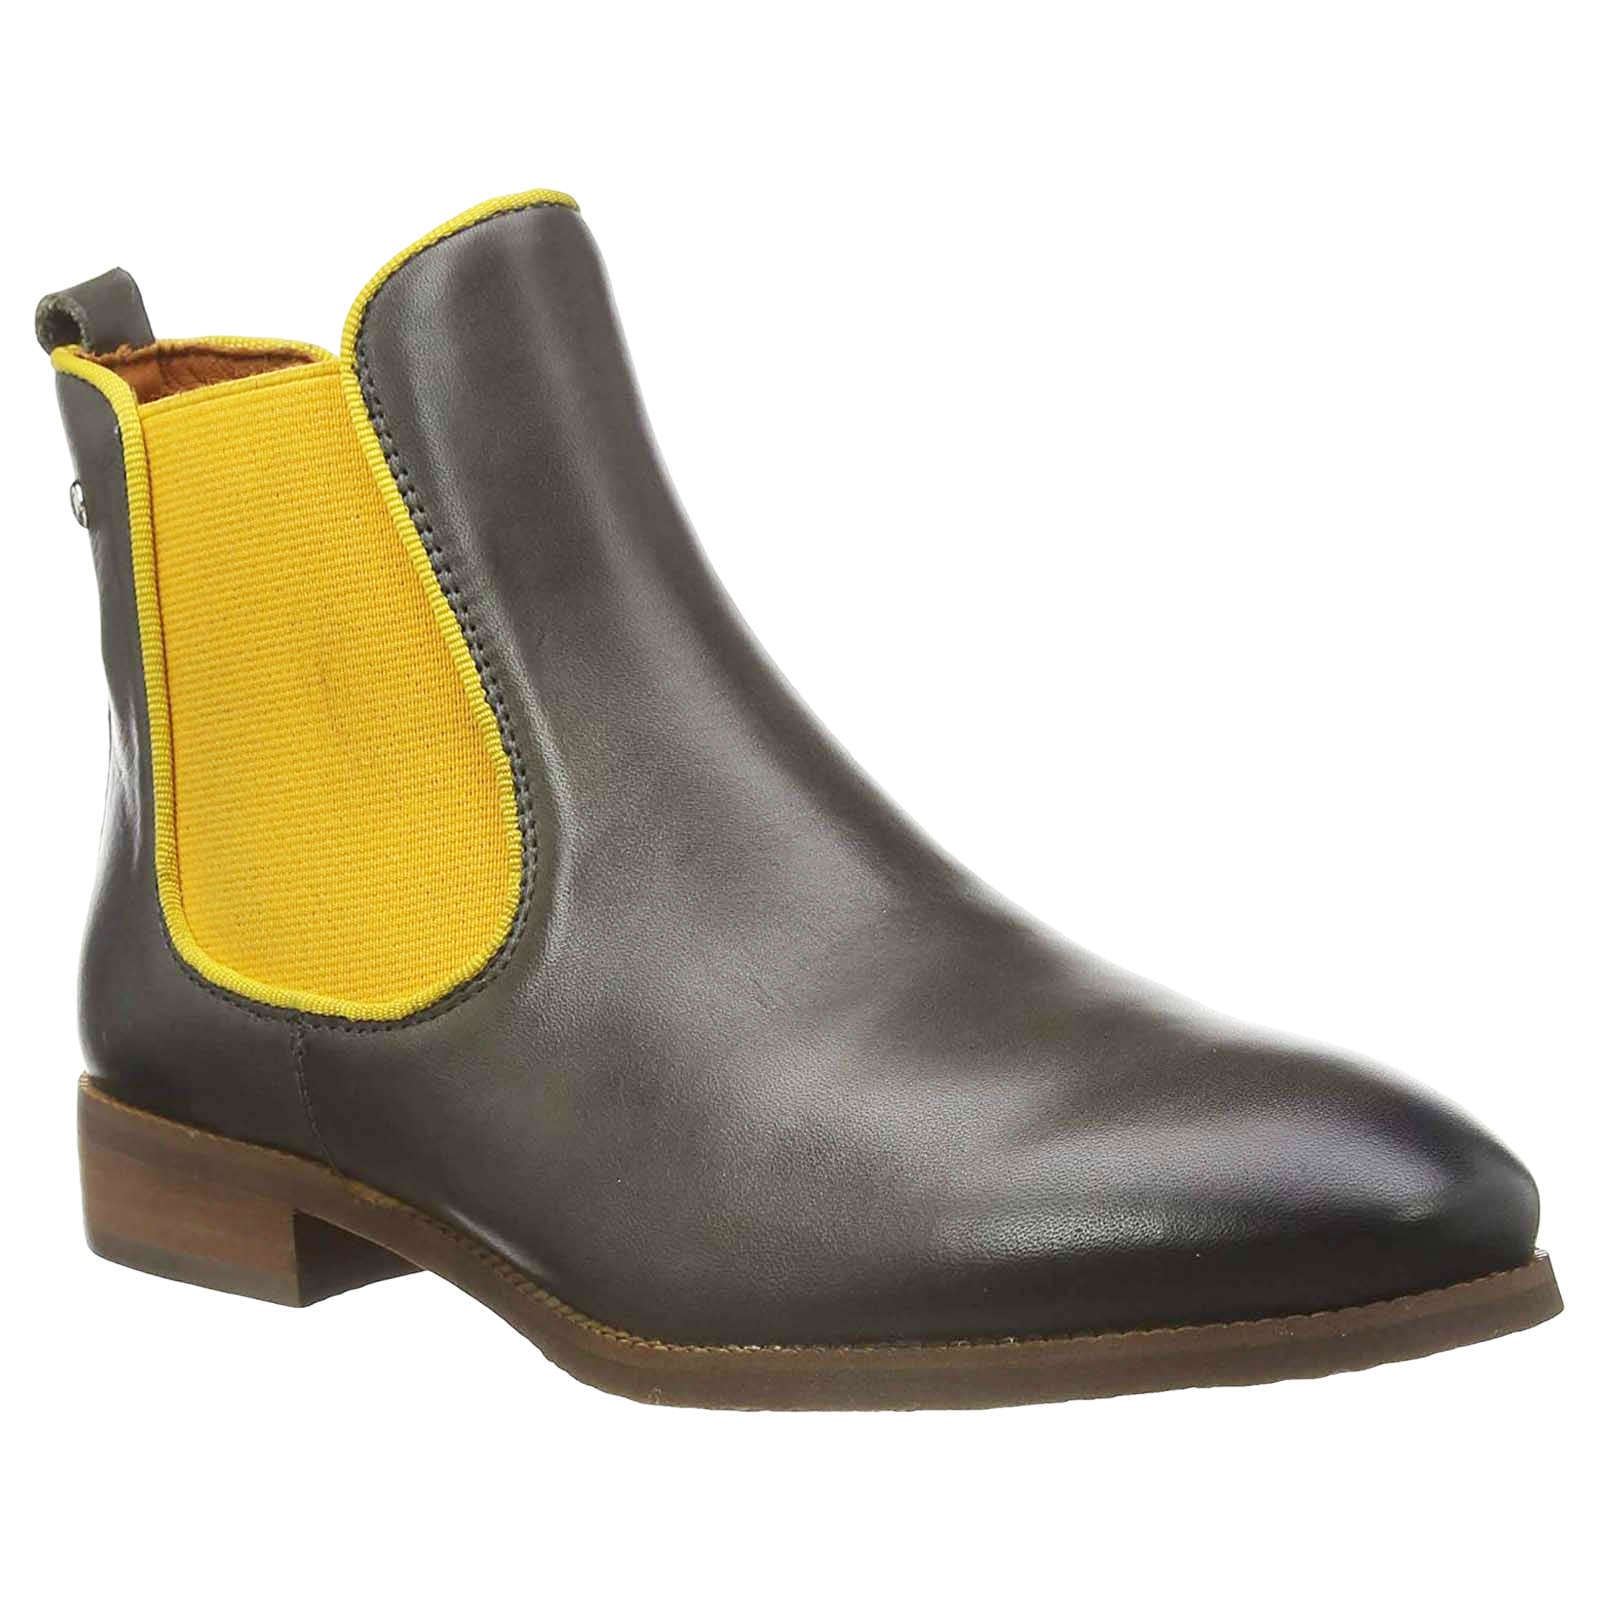 Royal Calfskin Leather Women's Chelsea Boots